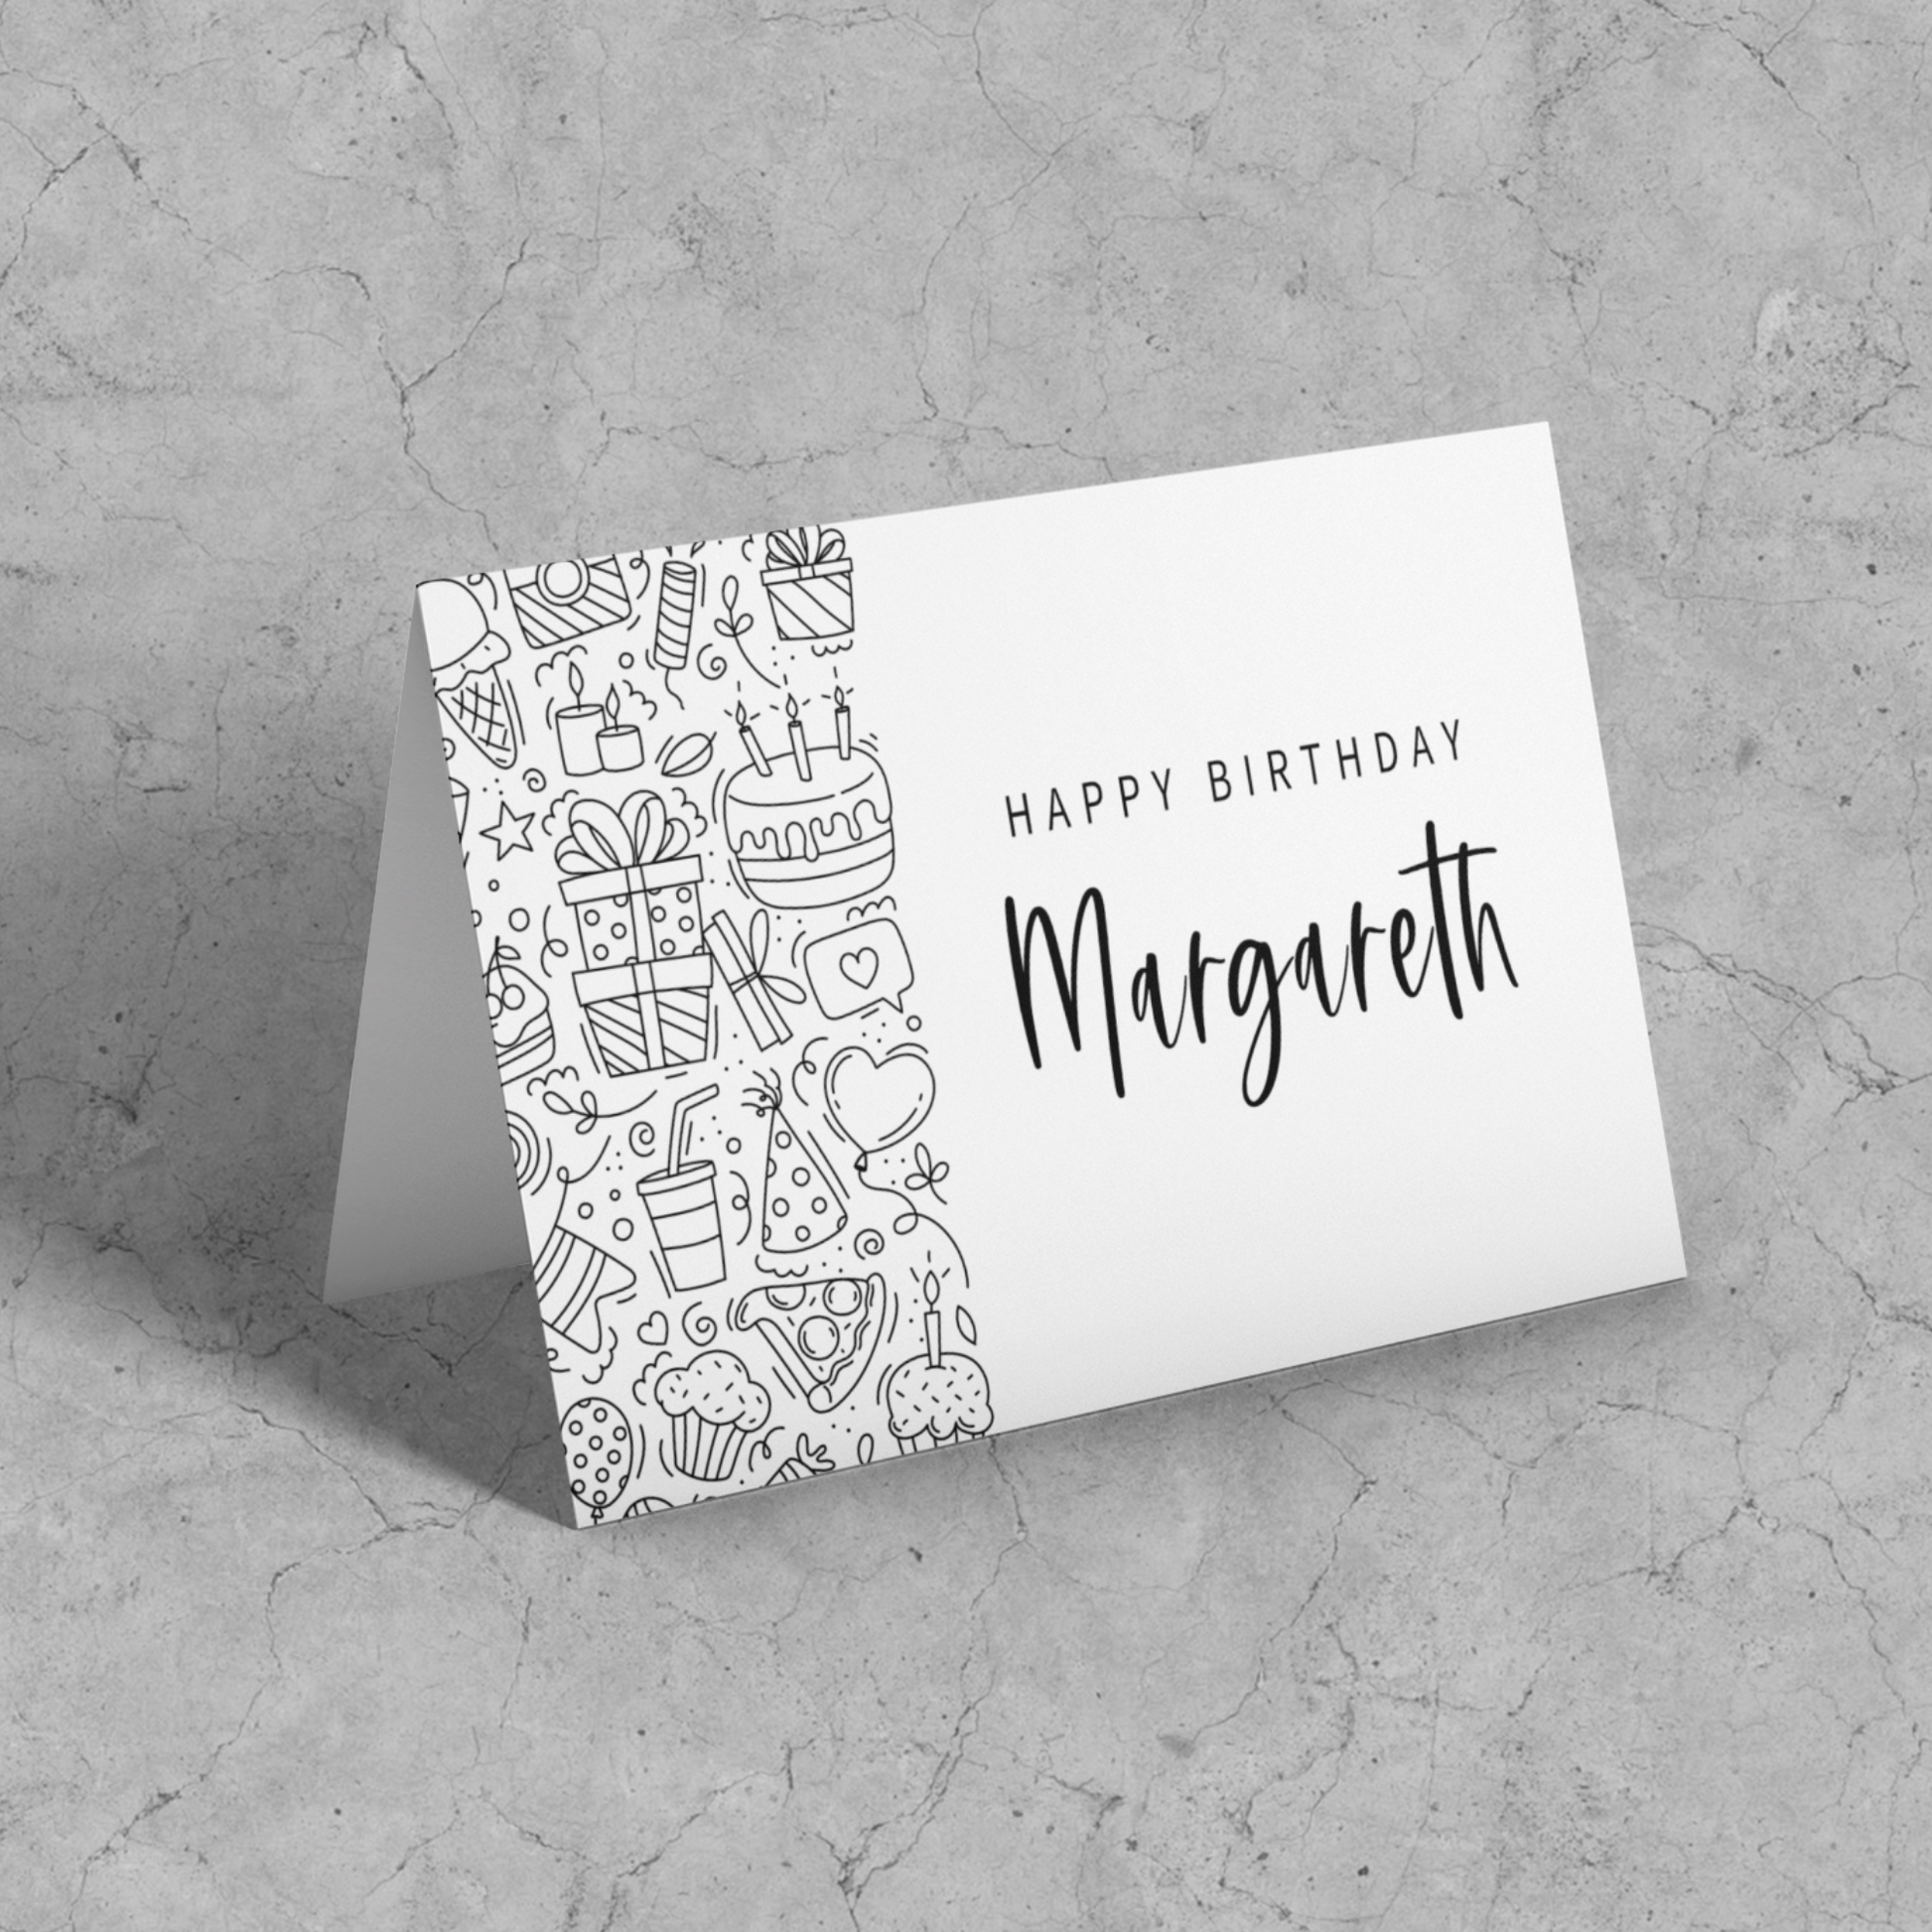 Personalized Happy Birthday Greeting Card for a Friend